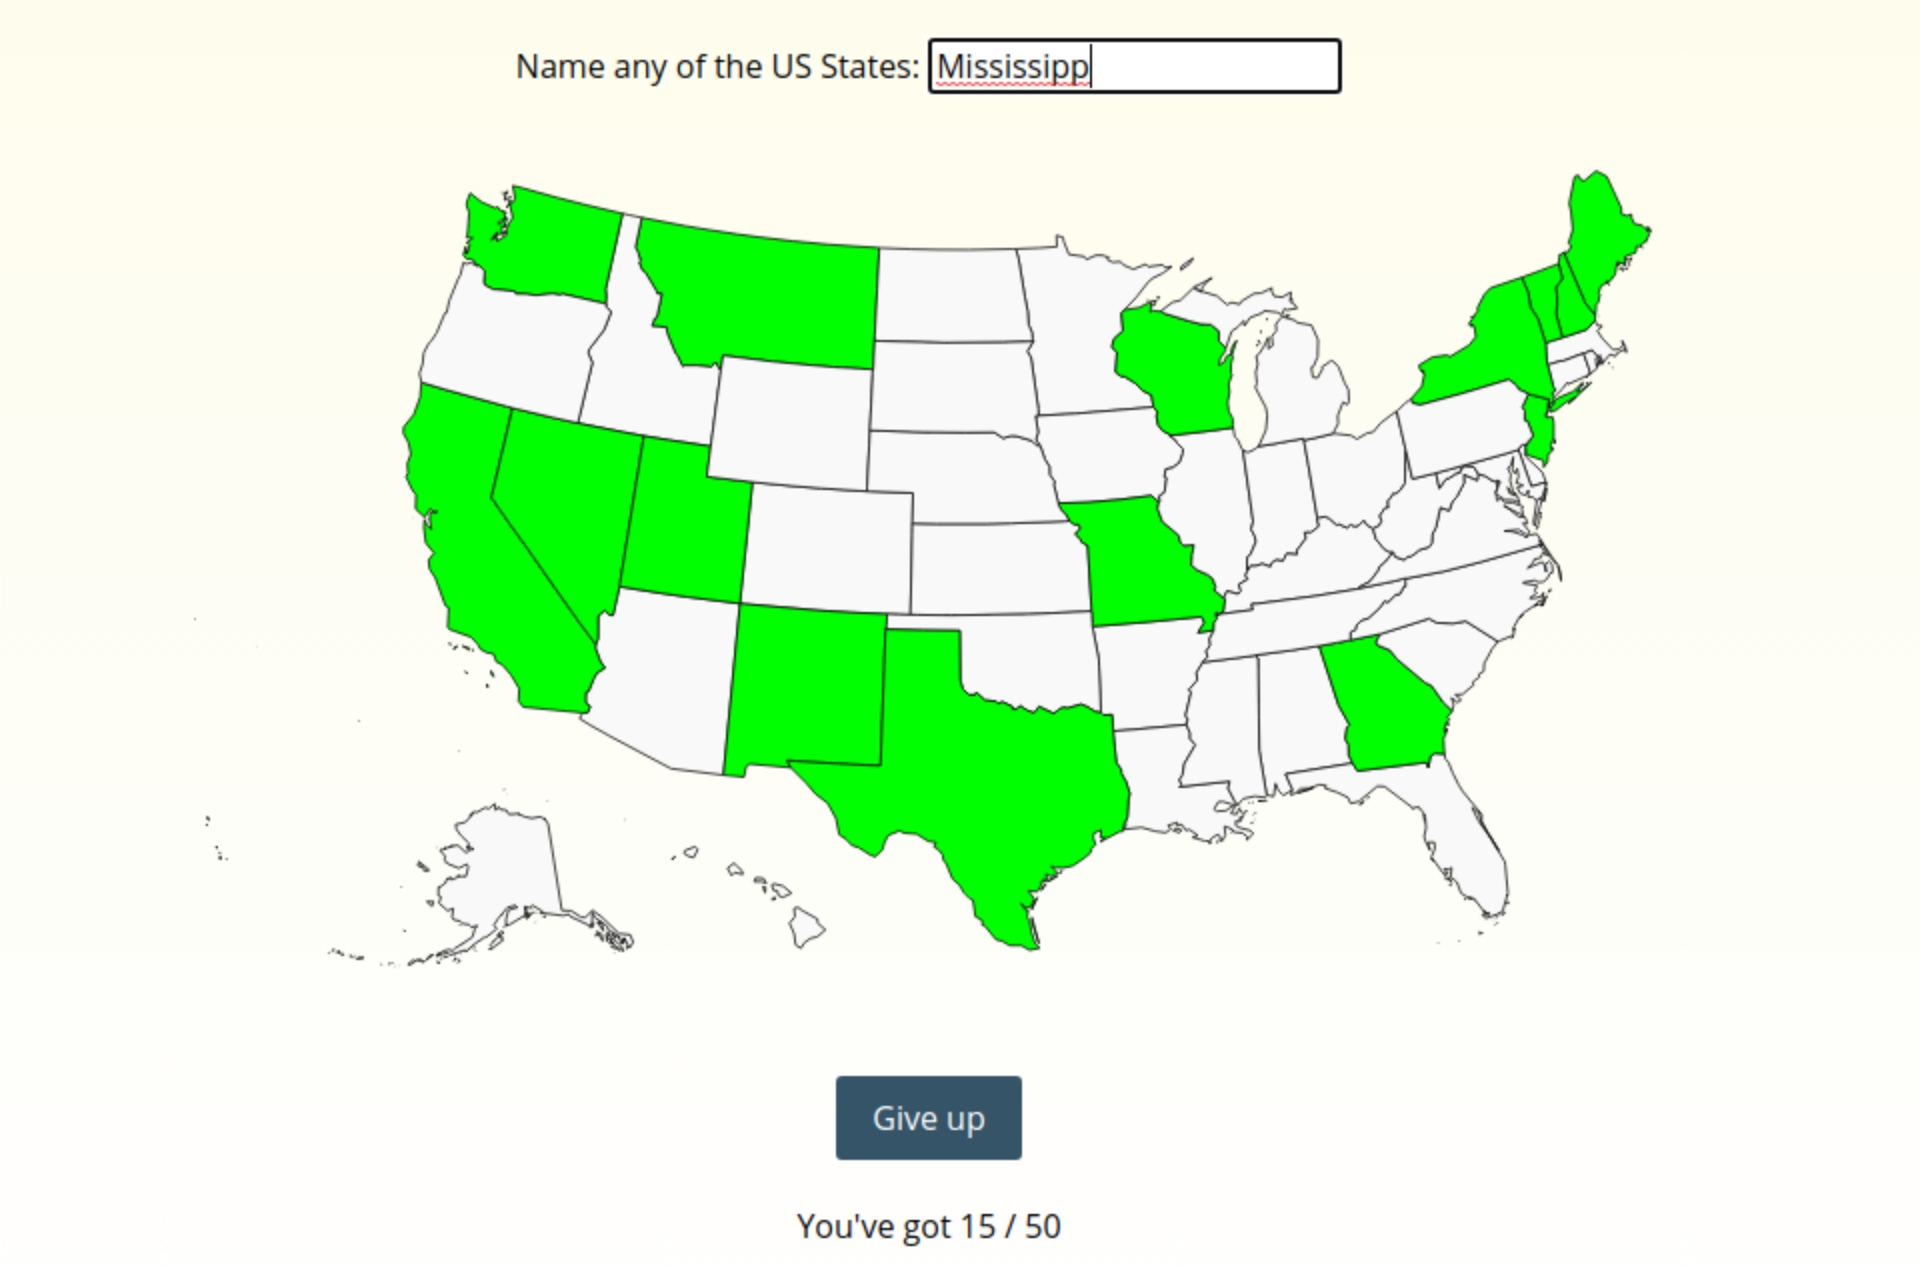 Screenshot of someone trying to name all the US states. They've got a few - highlighted in green on a map - and are currently trying to spell 'Mississippi'.